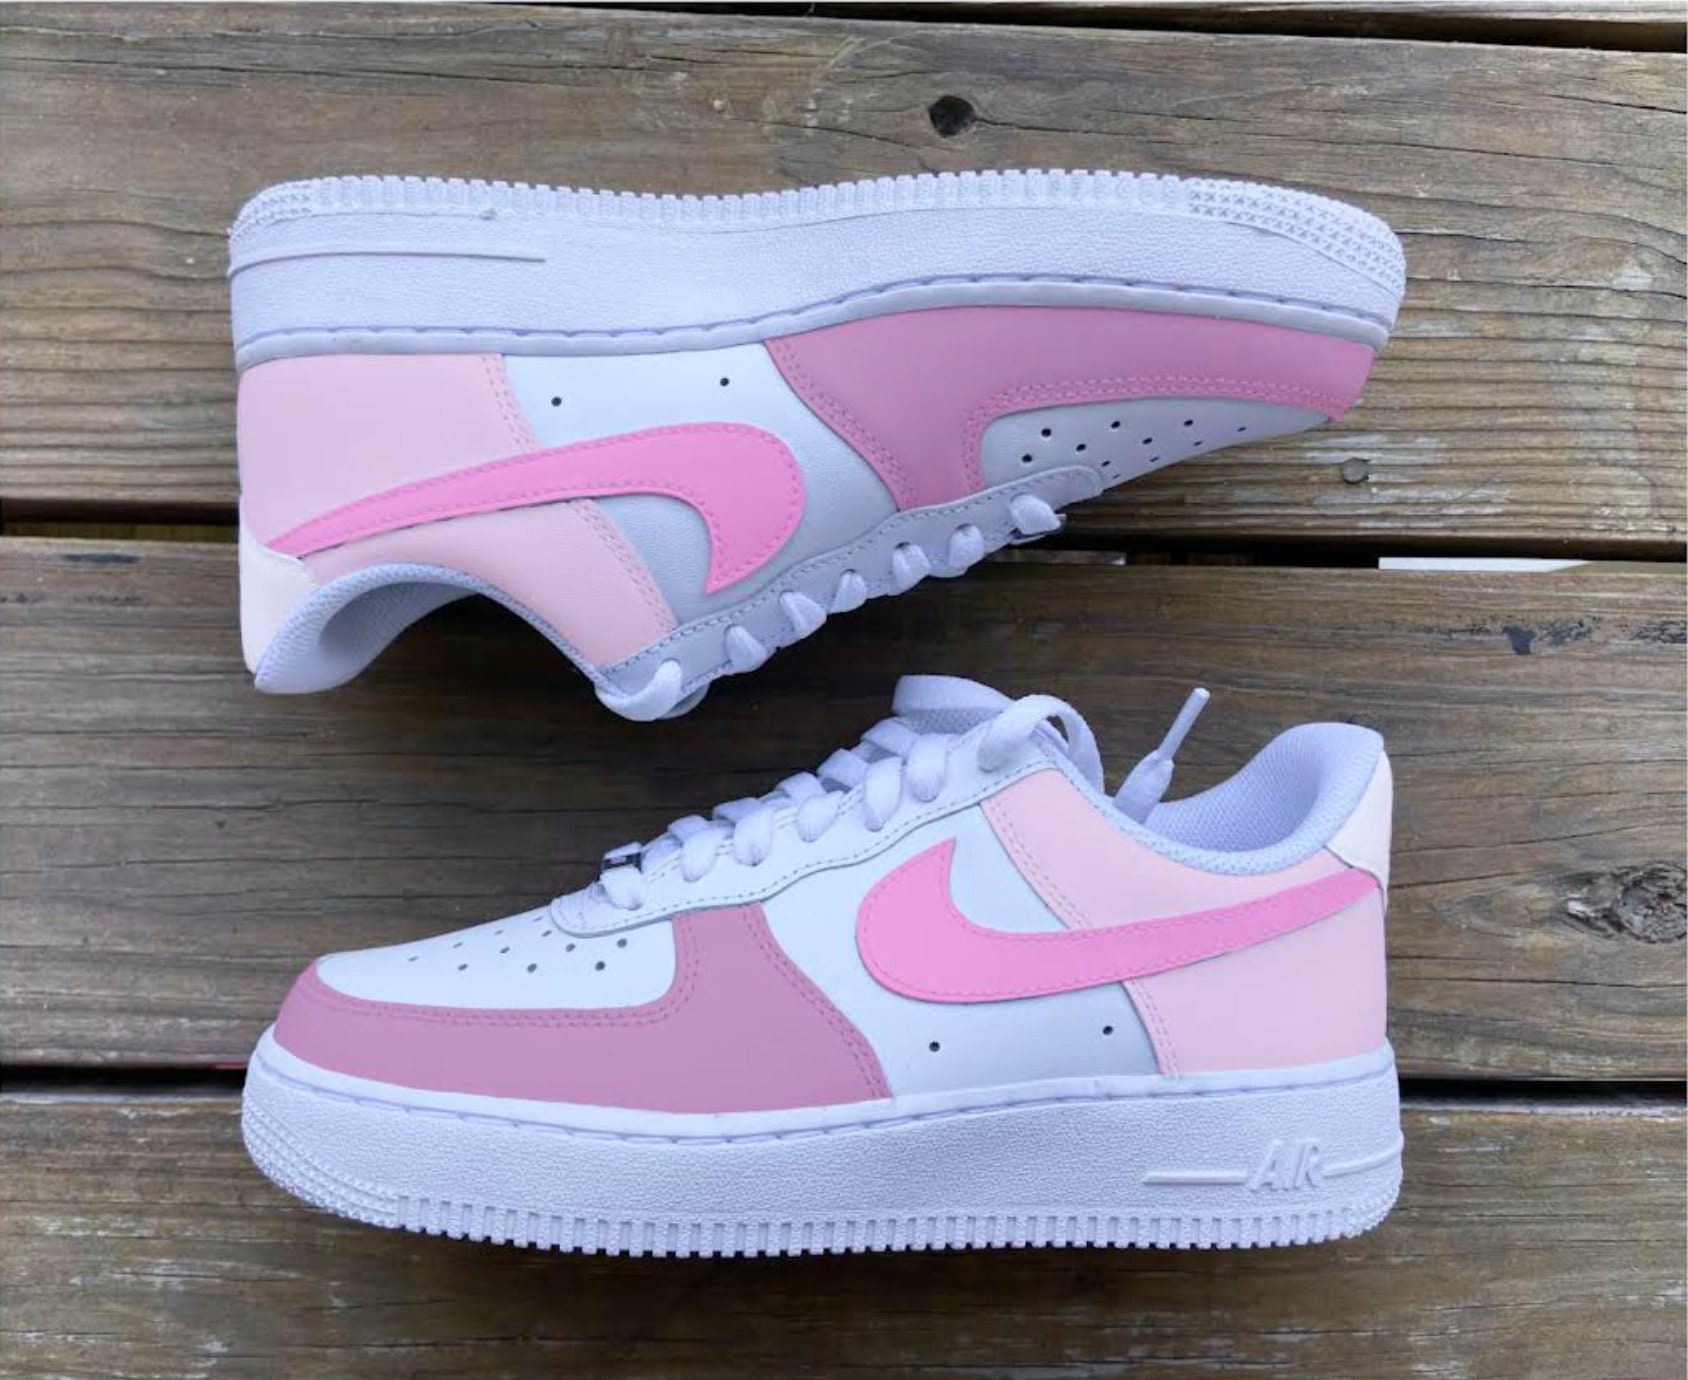 DIOR AIR FORCE  Cute nike shoes, Preppy shoes, Girly shoes